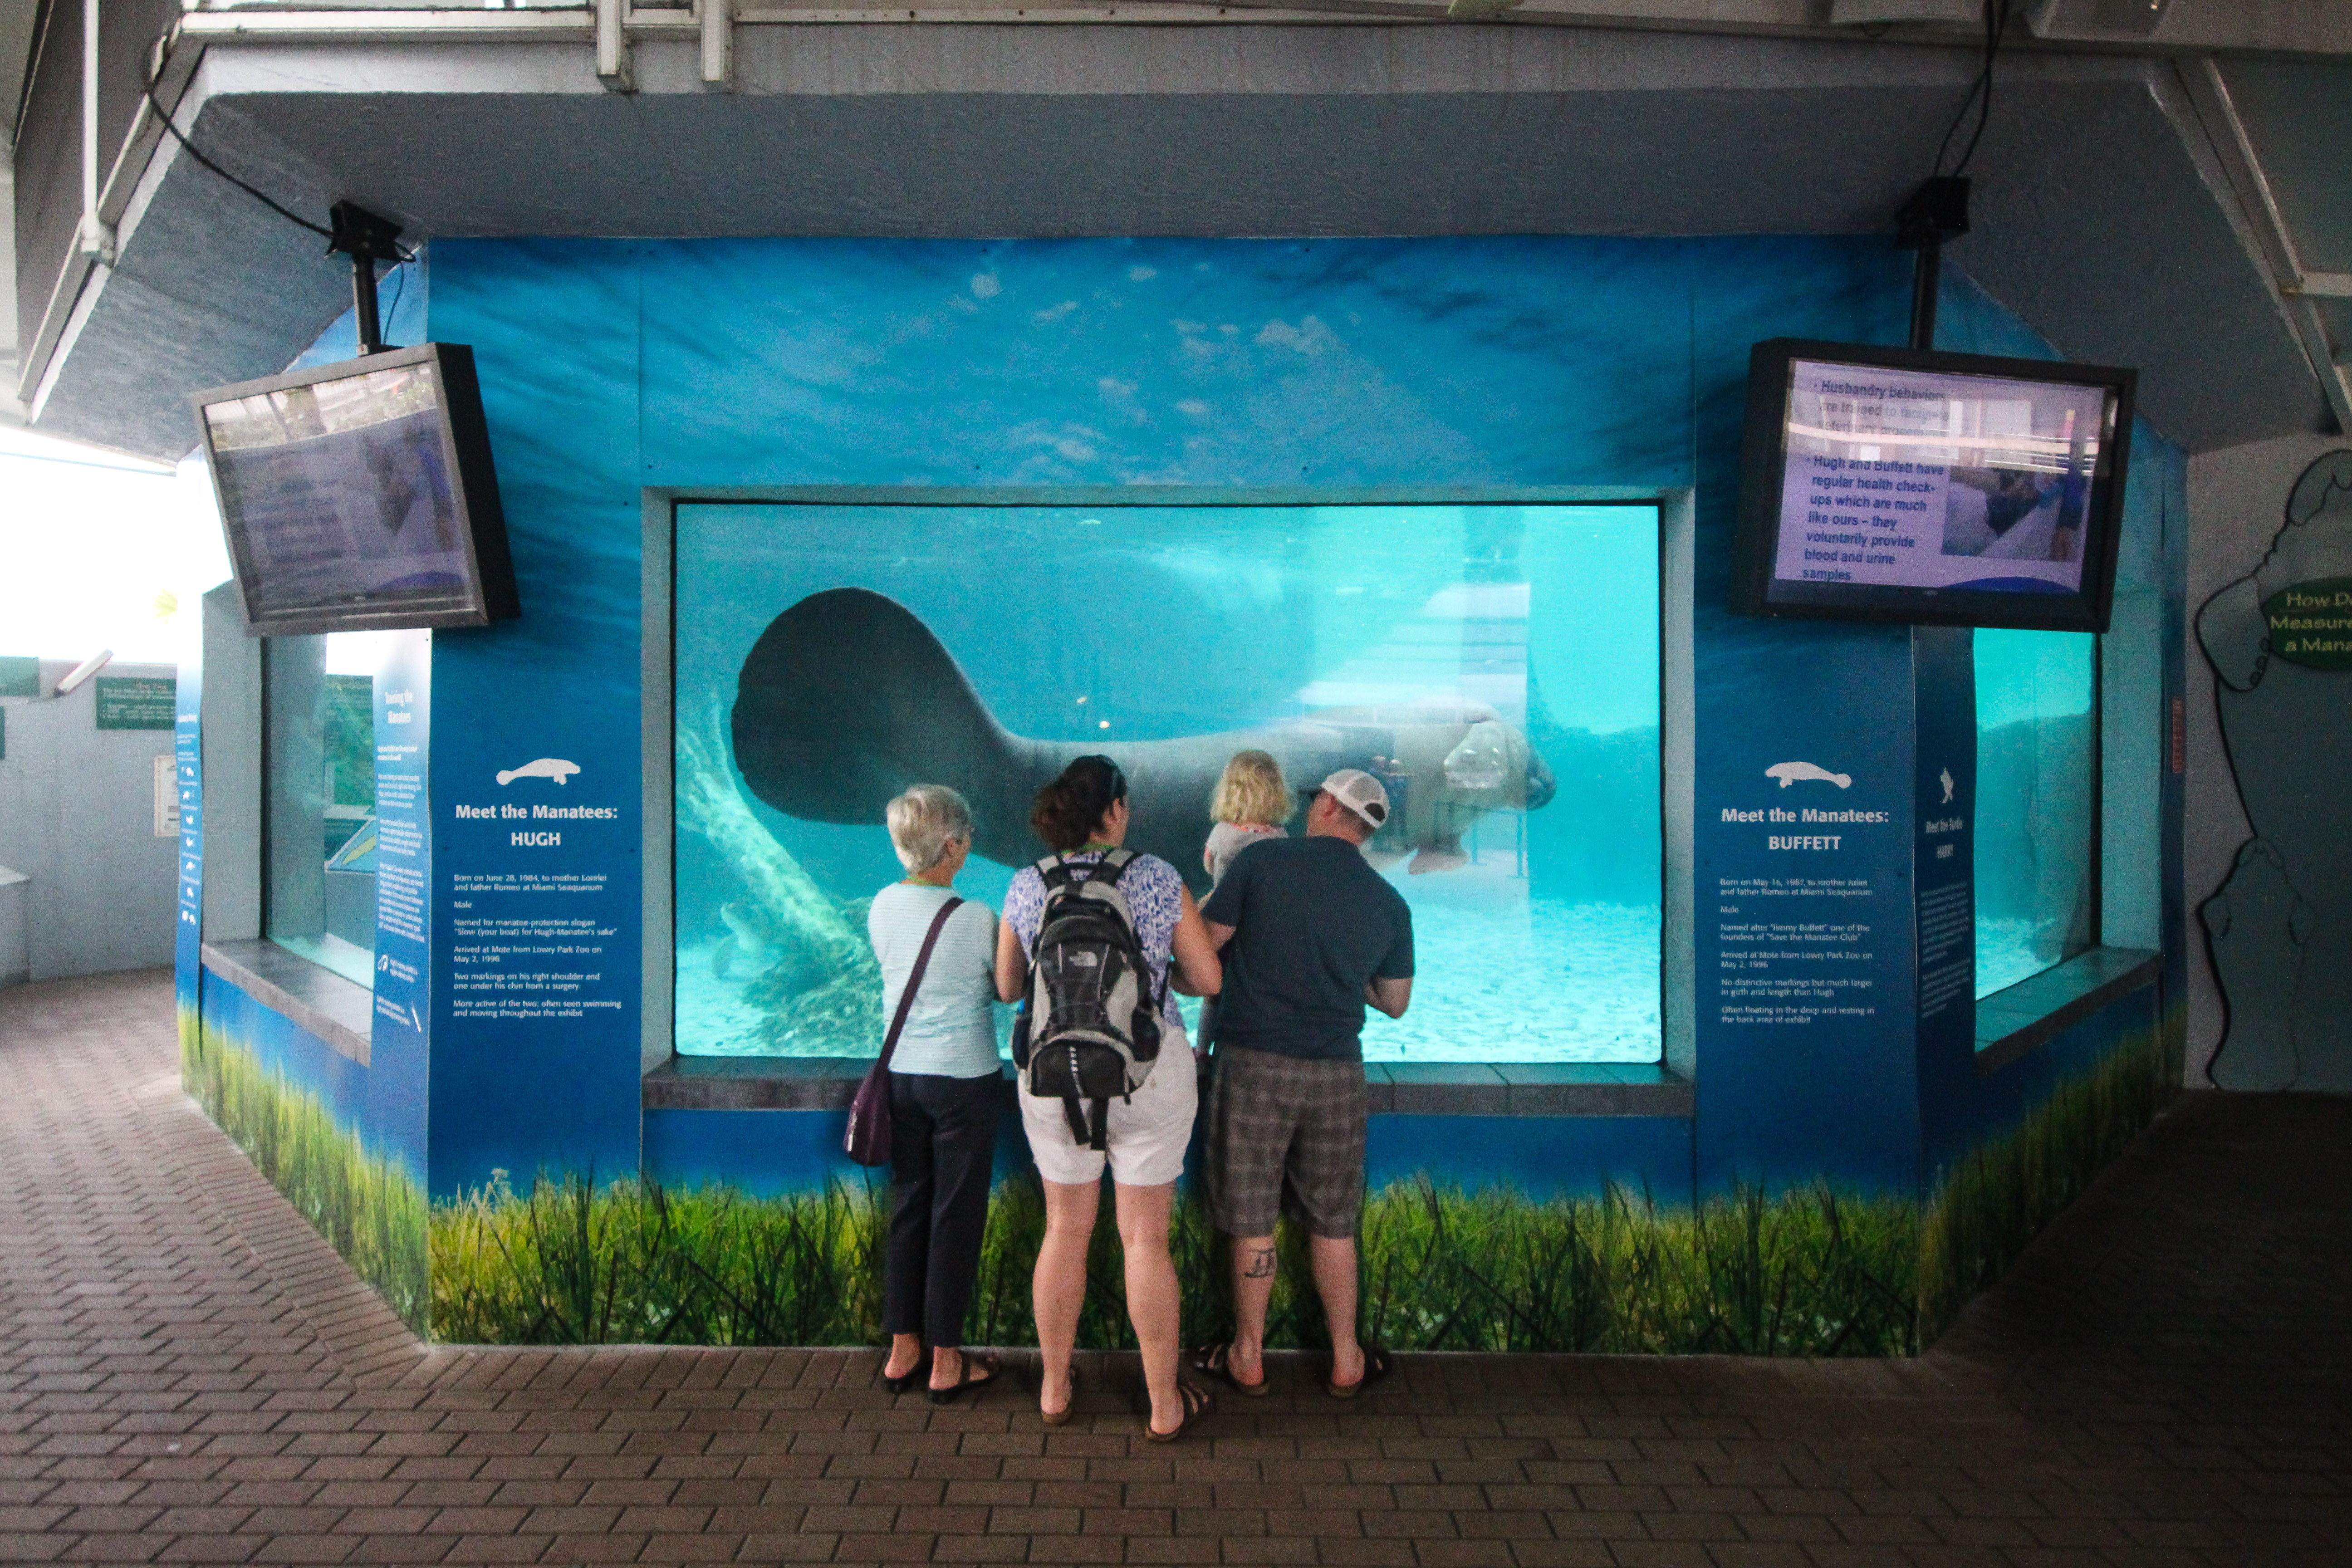 A multi-generational family of 4 gather together in front of a manatee exhibit in an aquarium.